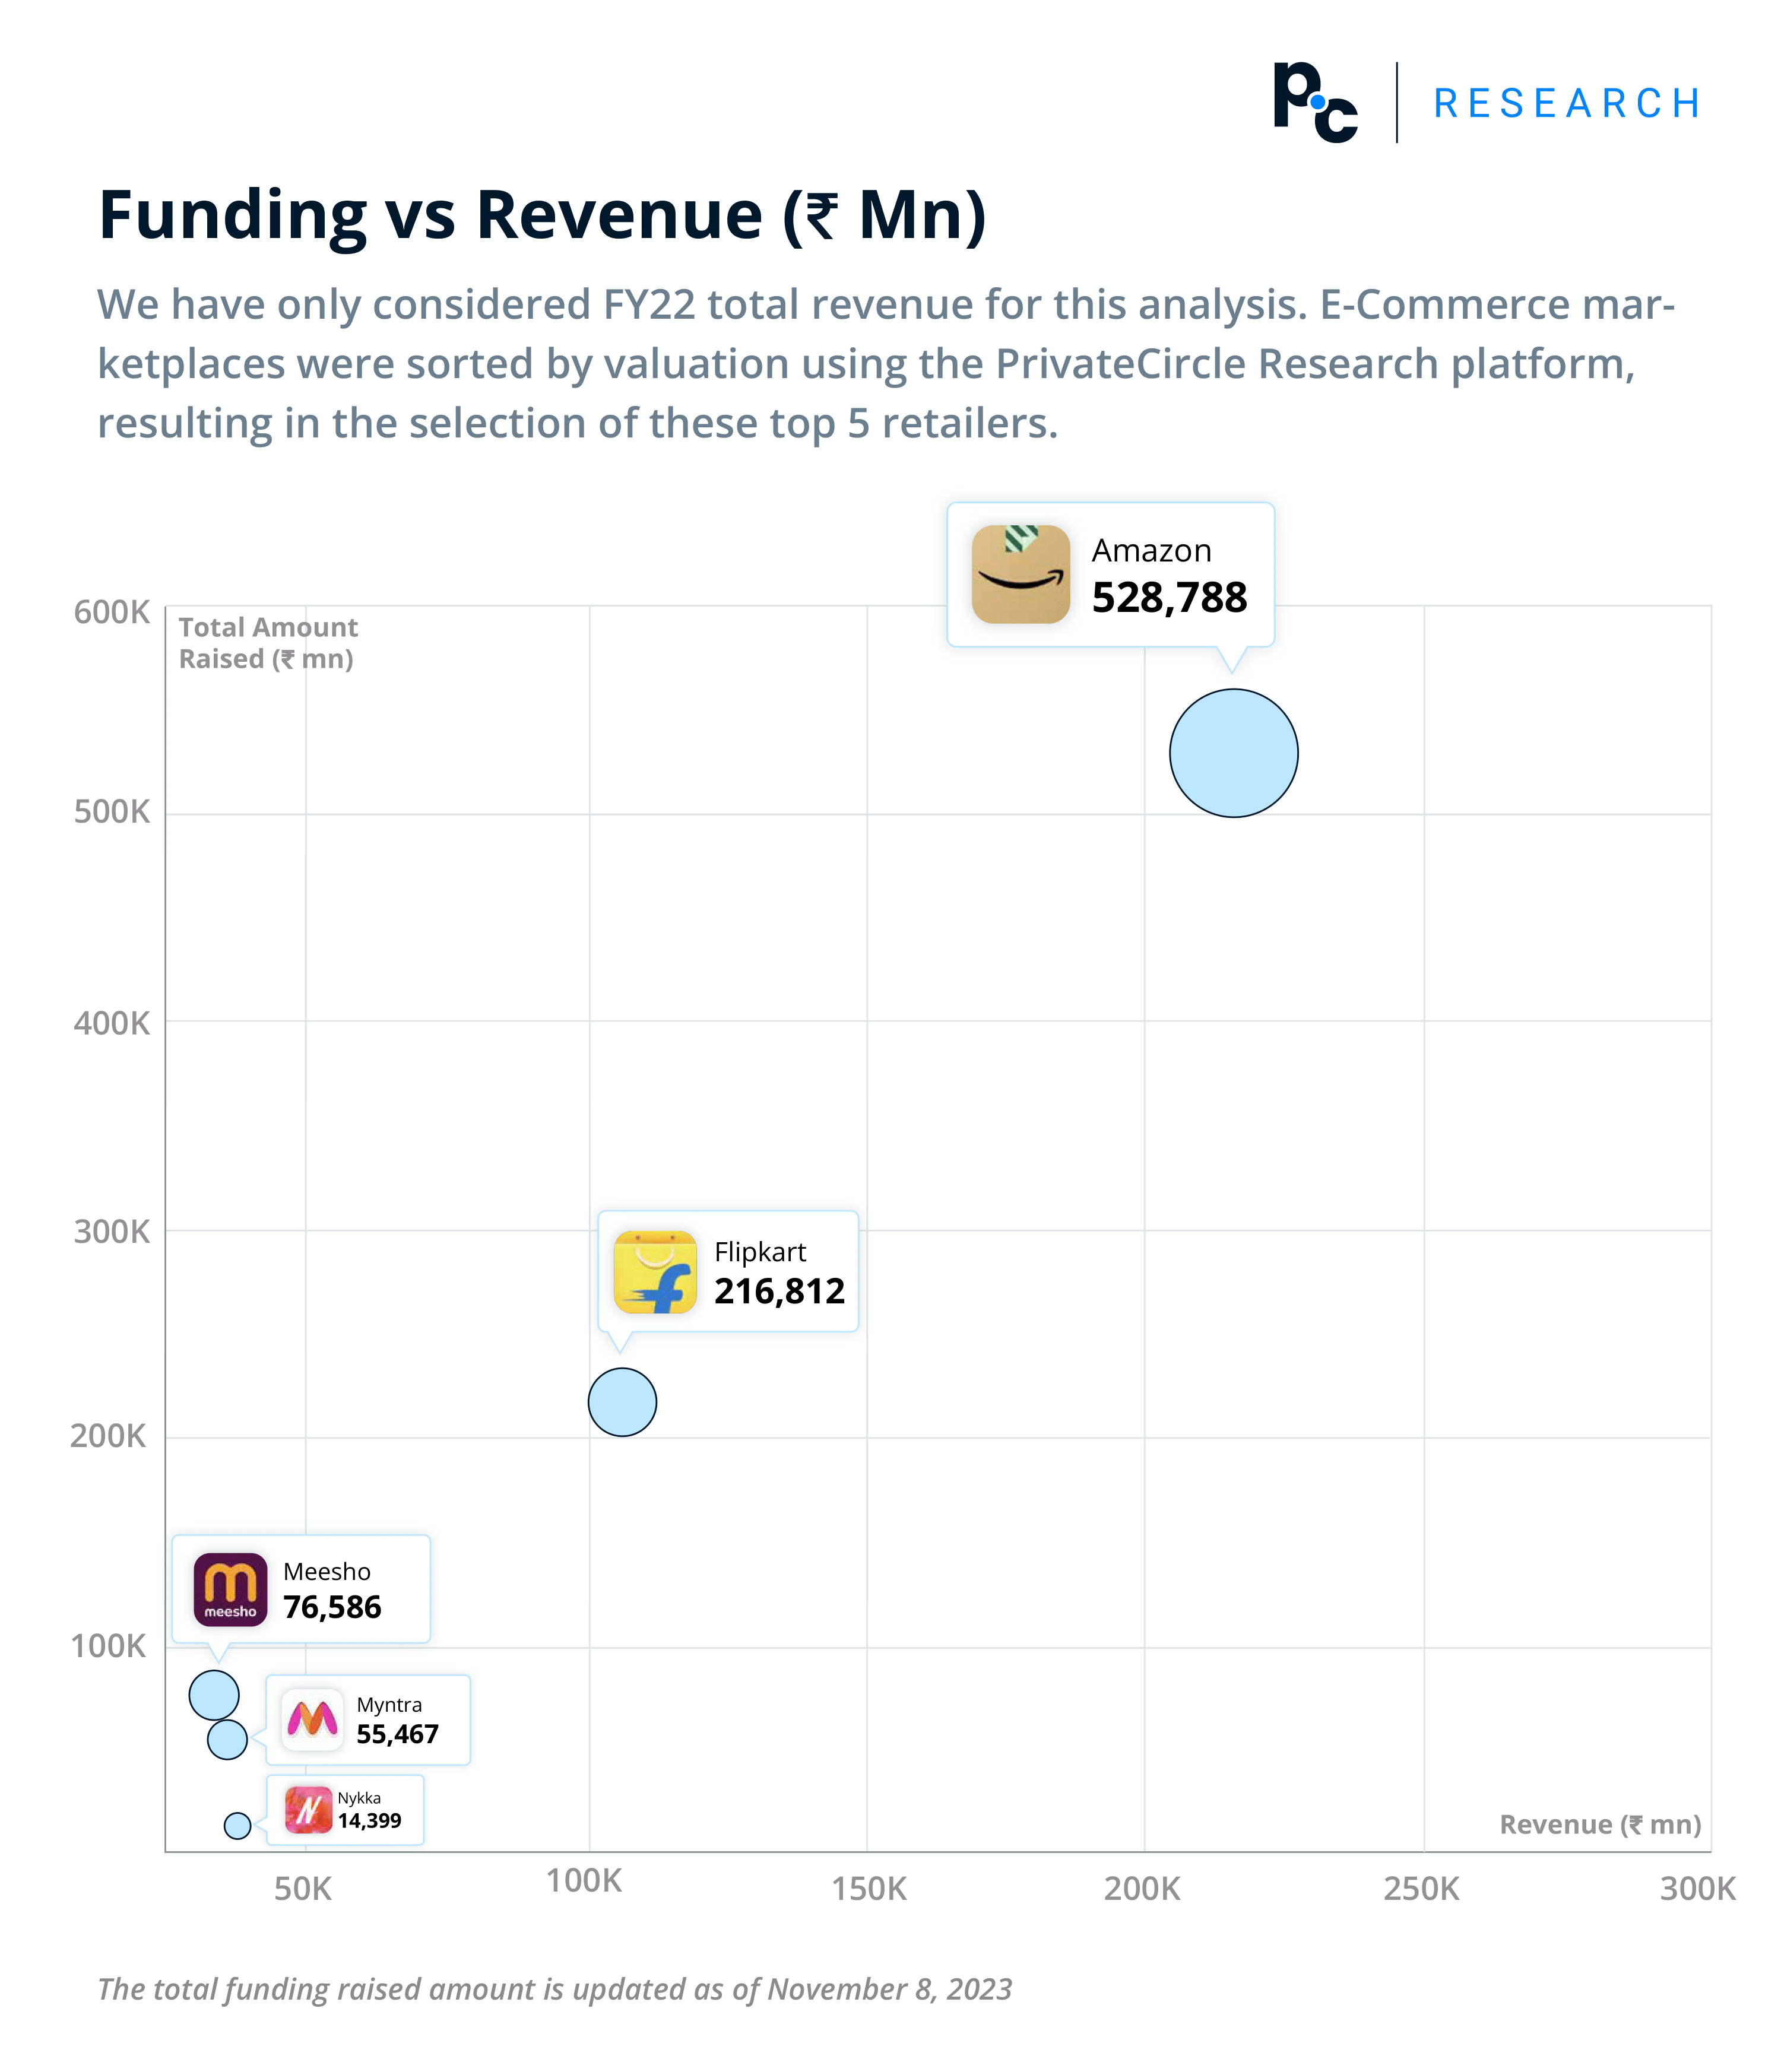 Indian E-Commerce Companies FY22: Funding vs Revenue (₹mn).

We have only considered FY22 total revenue for this analysis. E-Commerce marketplaces were sorted by valuation using the PrivateCircle Research platform, resulting in the selection of these top 5 retailers.
